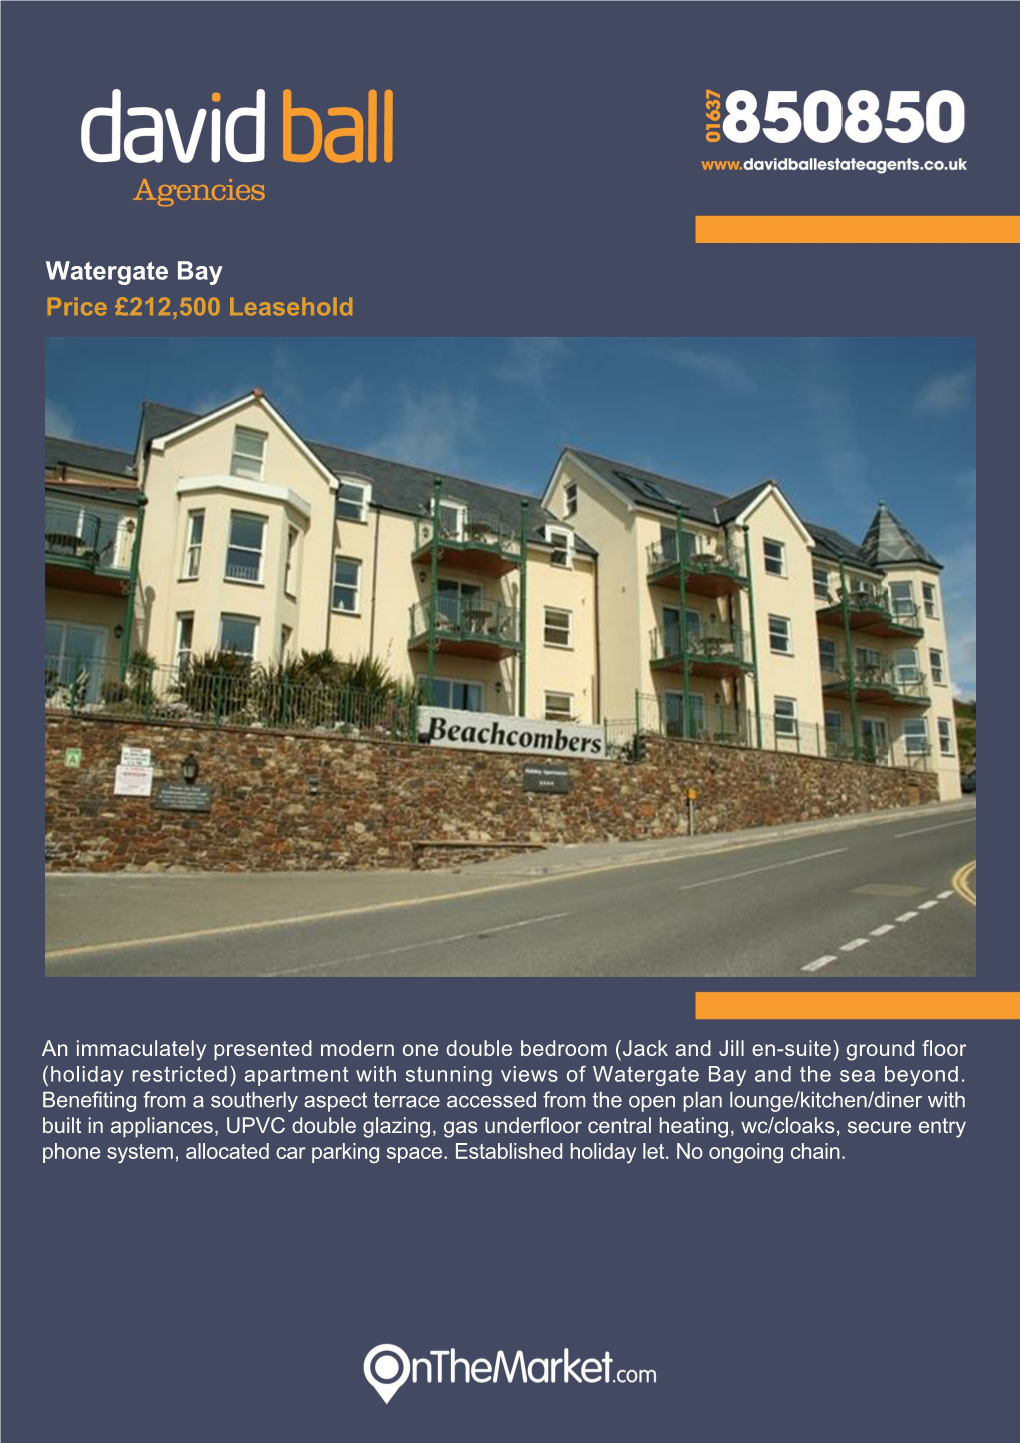 Watergate Bay Price £212,500 Leasehold